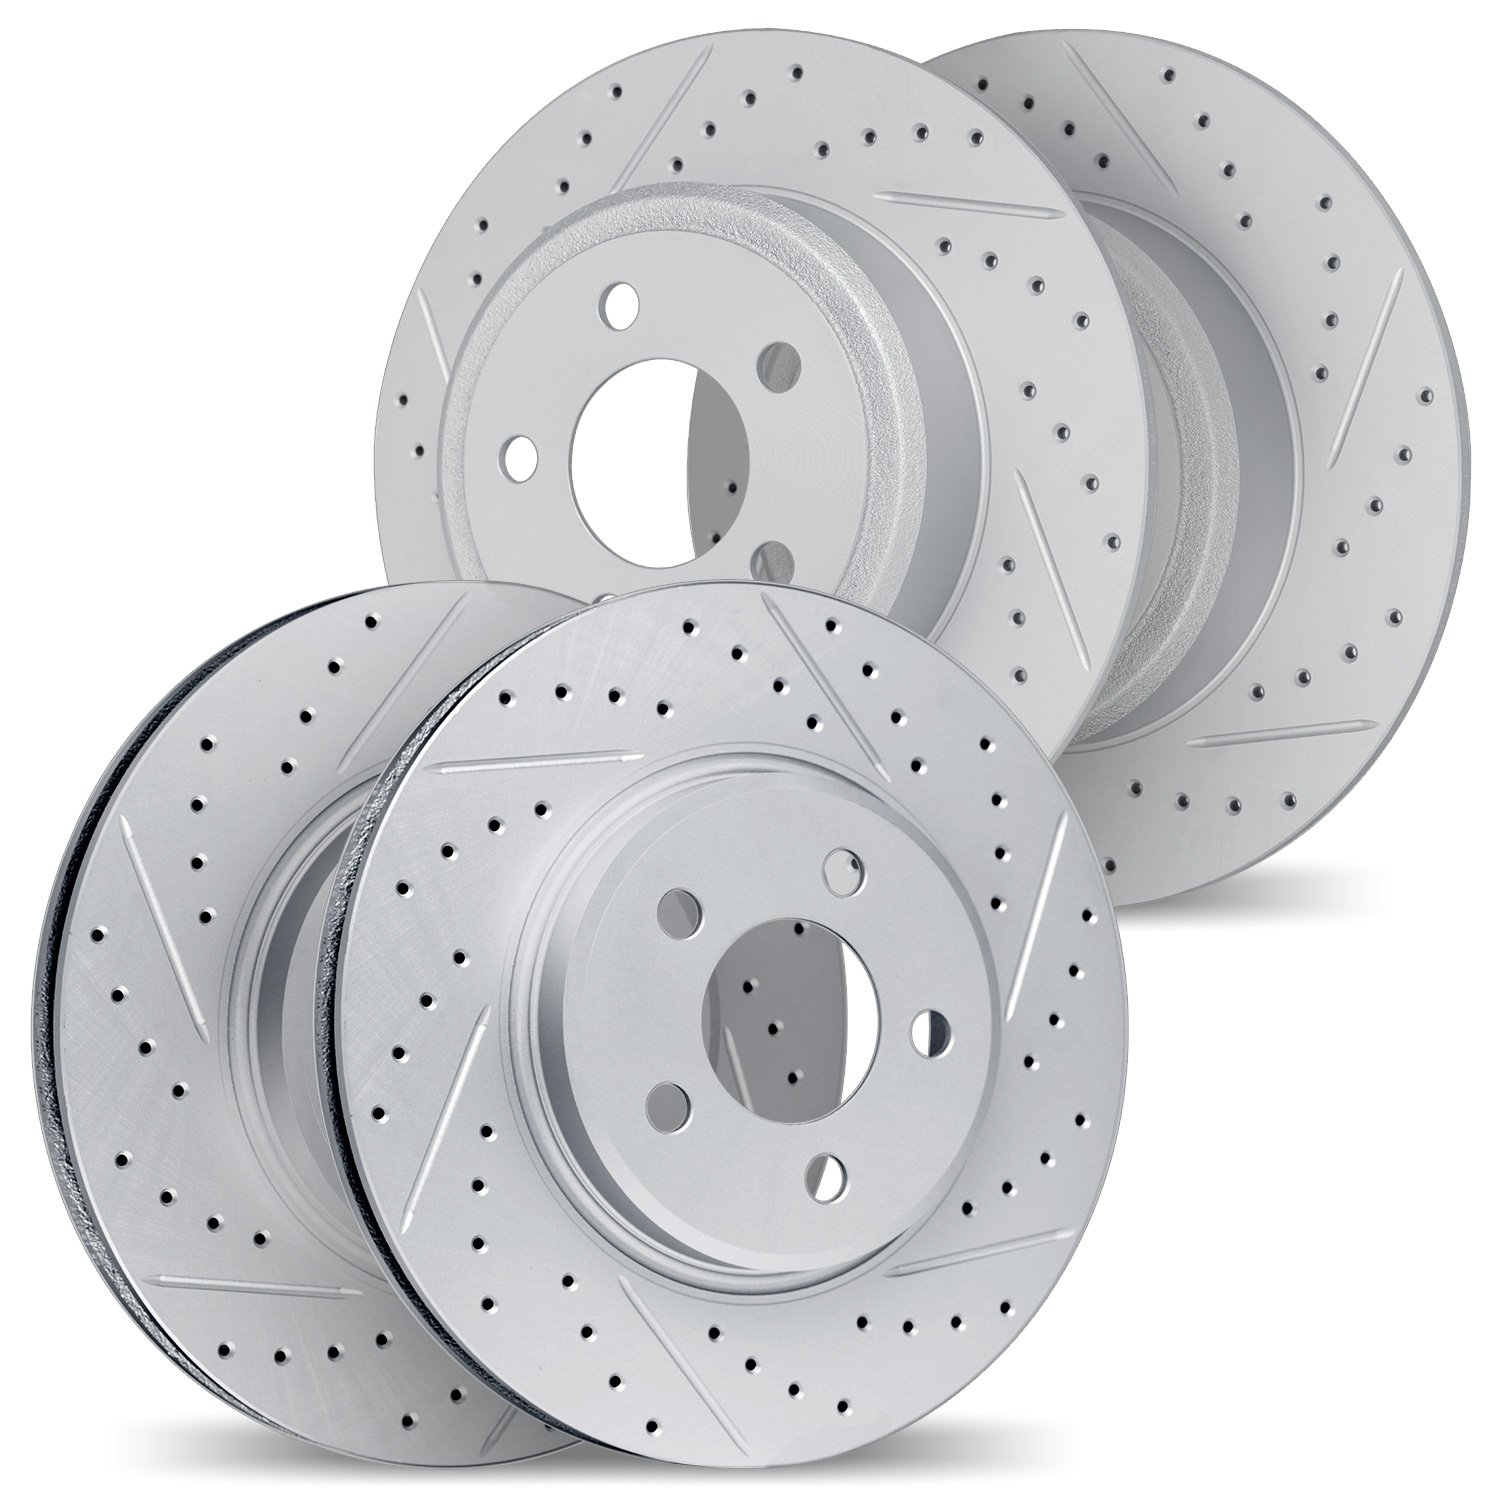 2004-76047 Geoperformance Drilled/Slotted Brake Rotors, 2004-2007 Lexus/Toyota/Scion, Position: Front and Rear